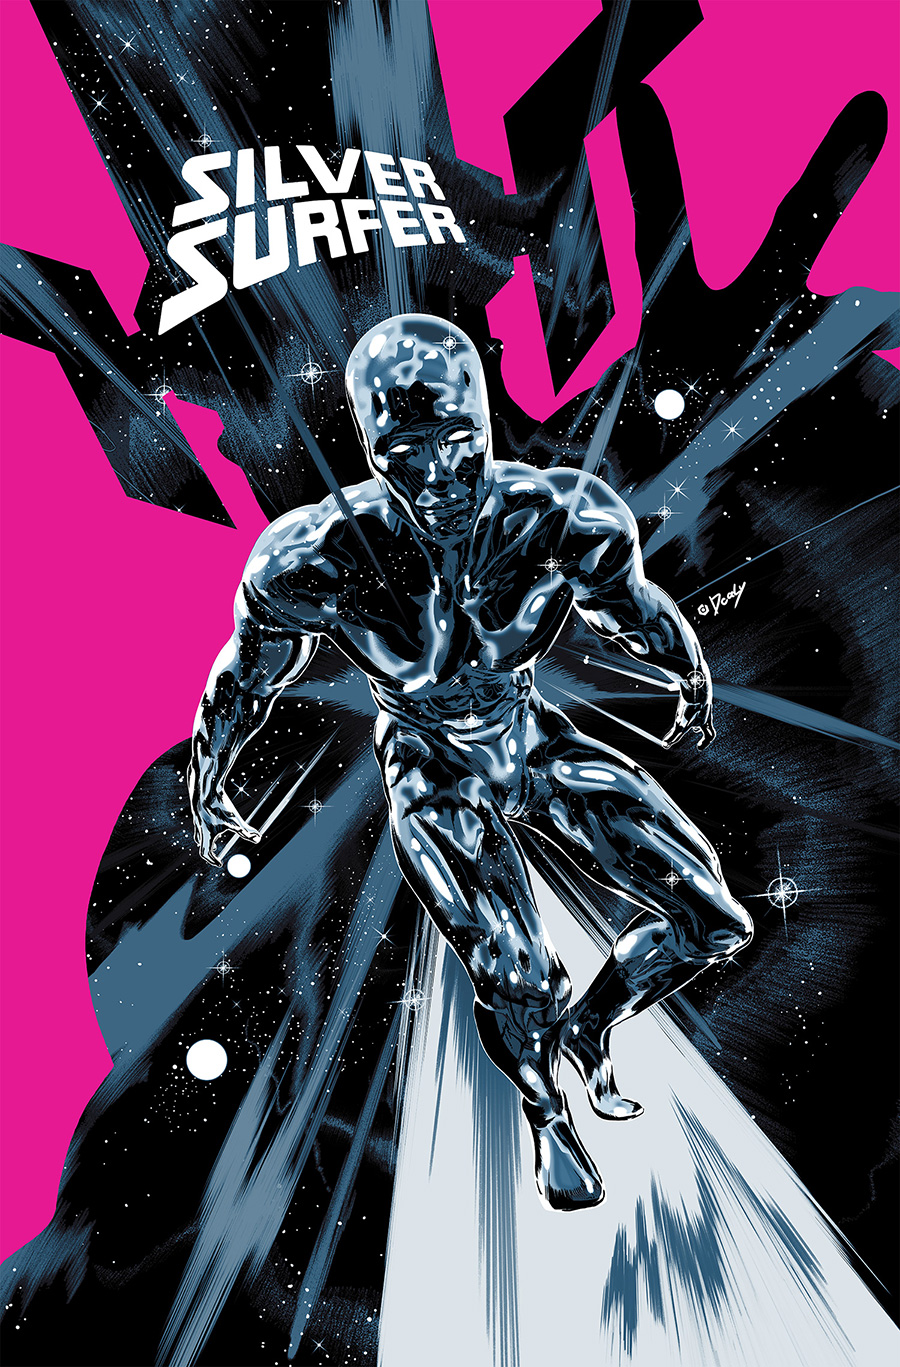 Silver-surfer-doaly-poster-comic-cover-art-3